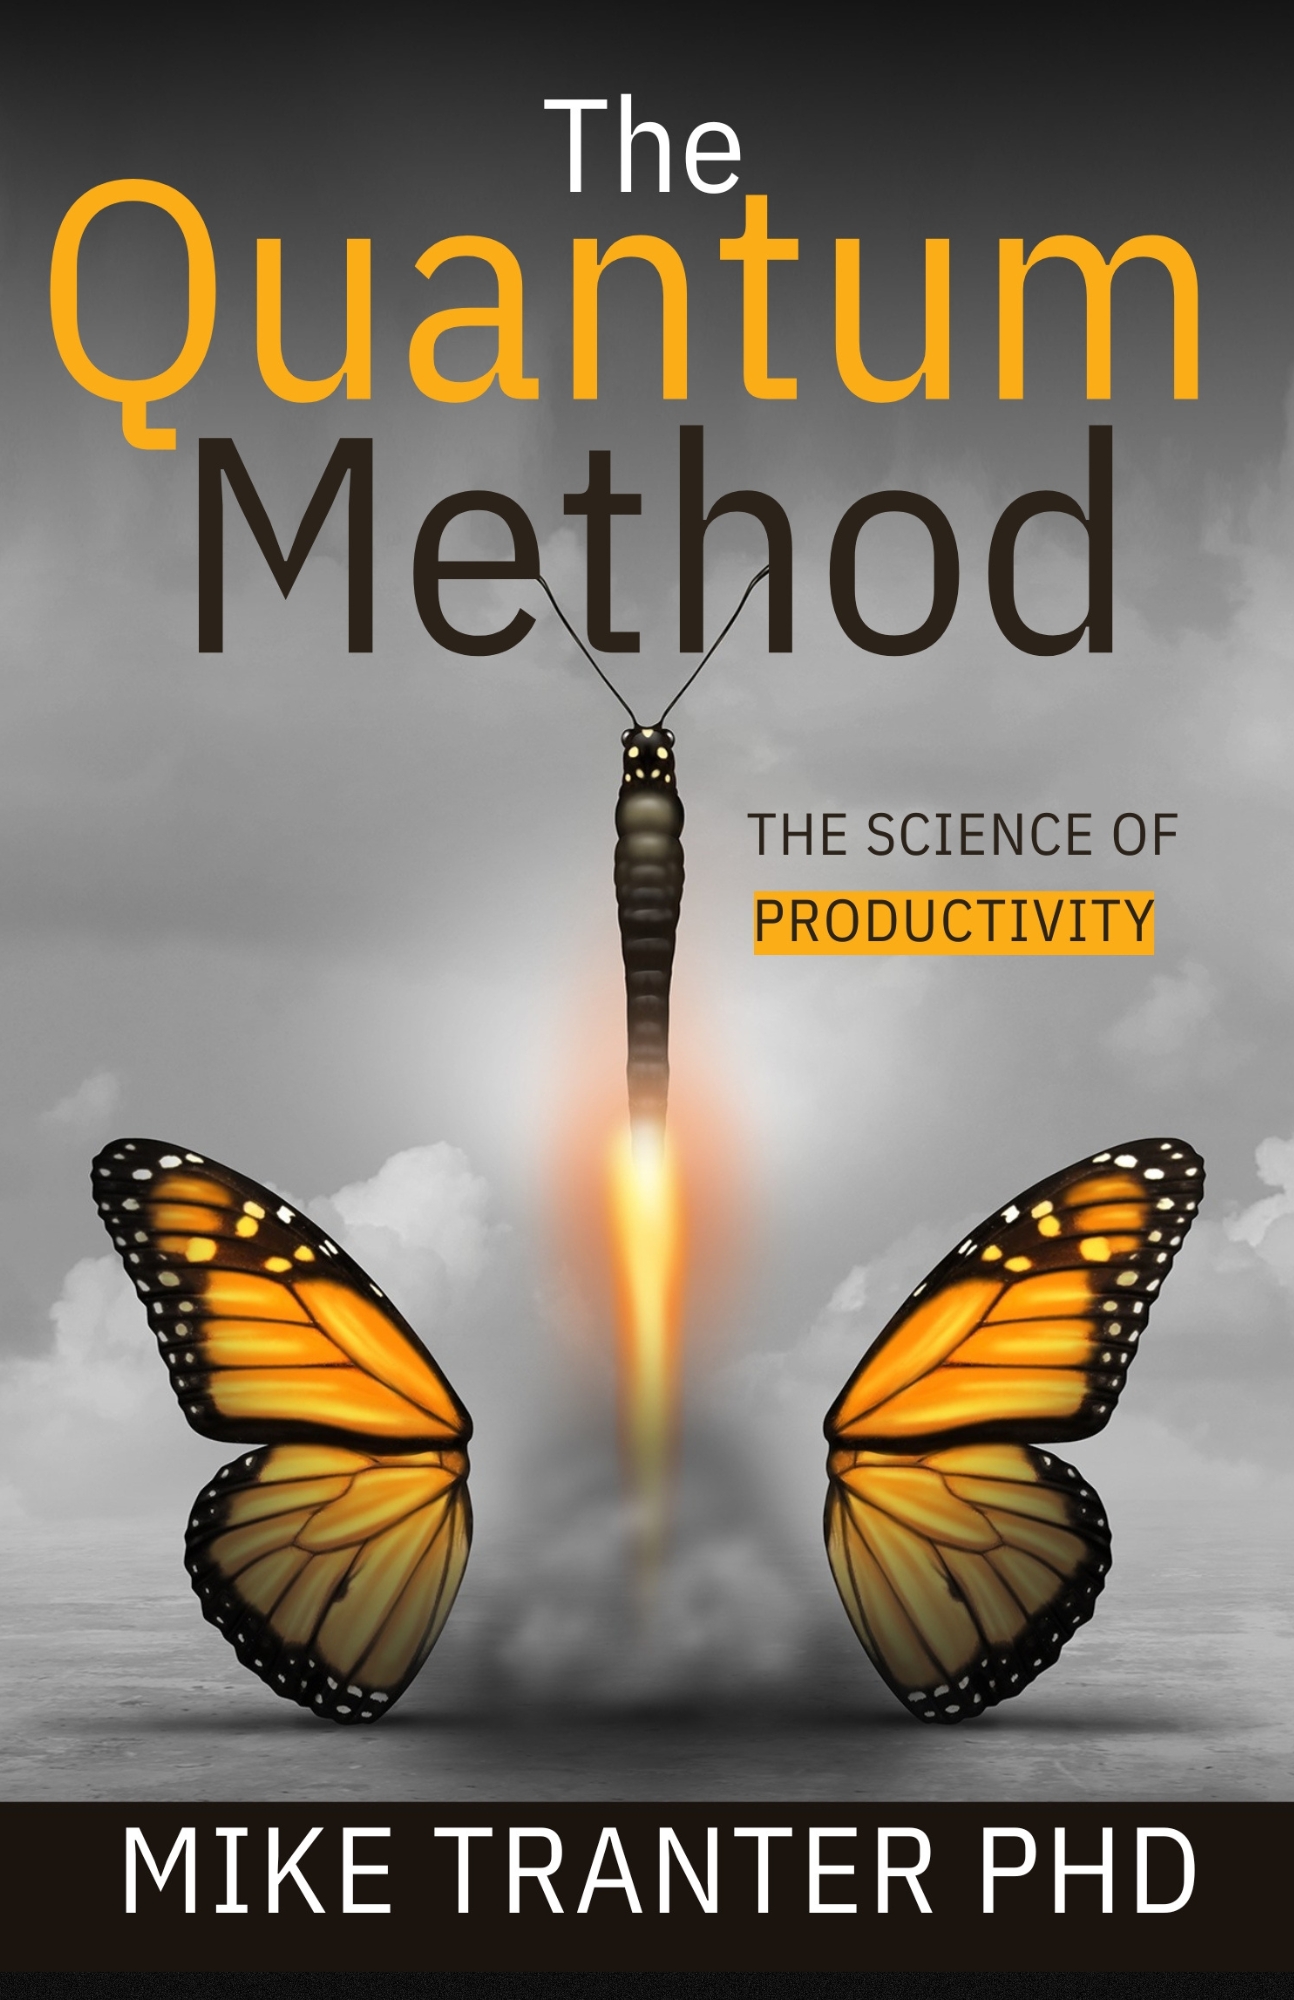 The Quantum Method , maximise productivity Job promotion Side hustle Achieve goals Brain reward system Daily grind Work hard Grind Productive day daily goals